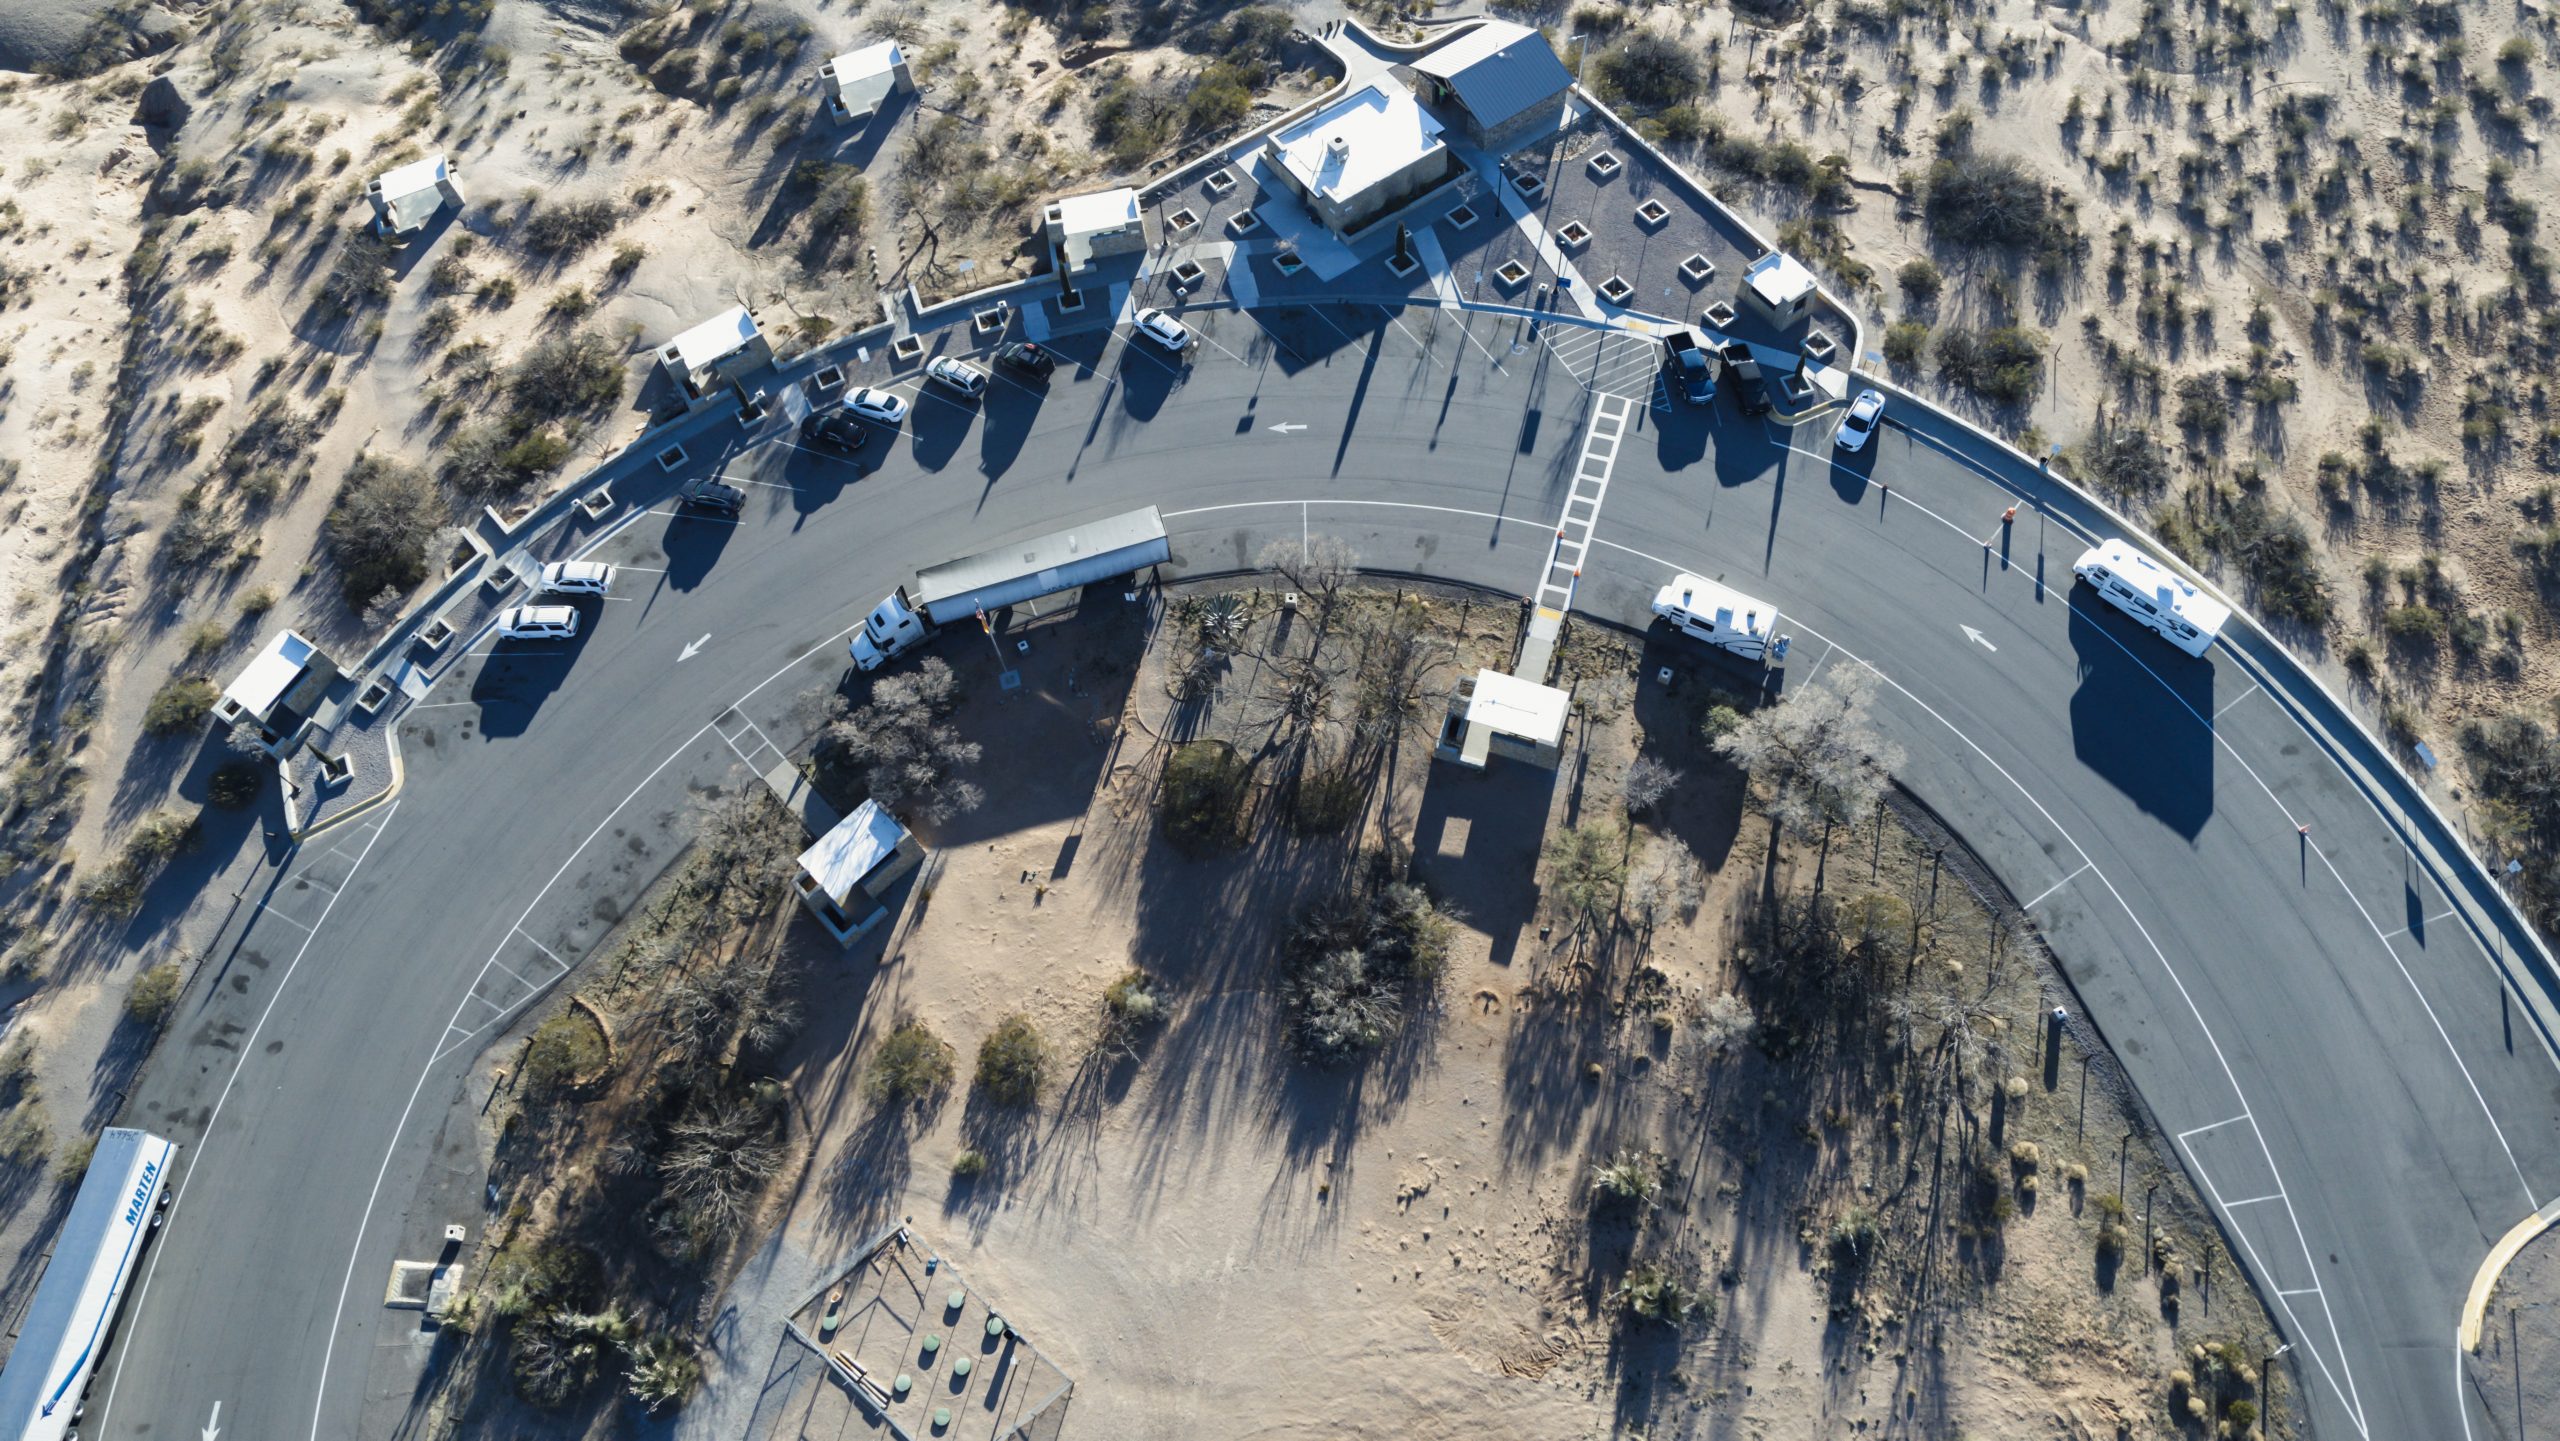 Aerial photo of a rest area with parking spaces and truck parking areas.